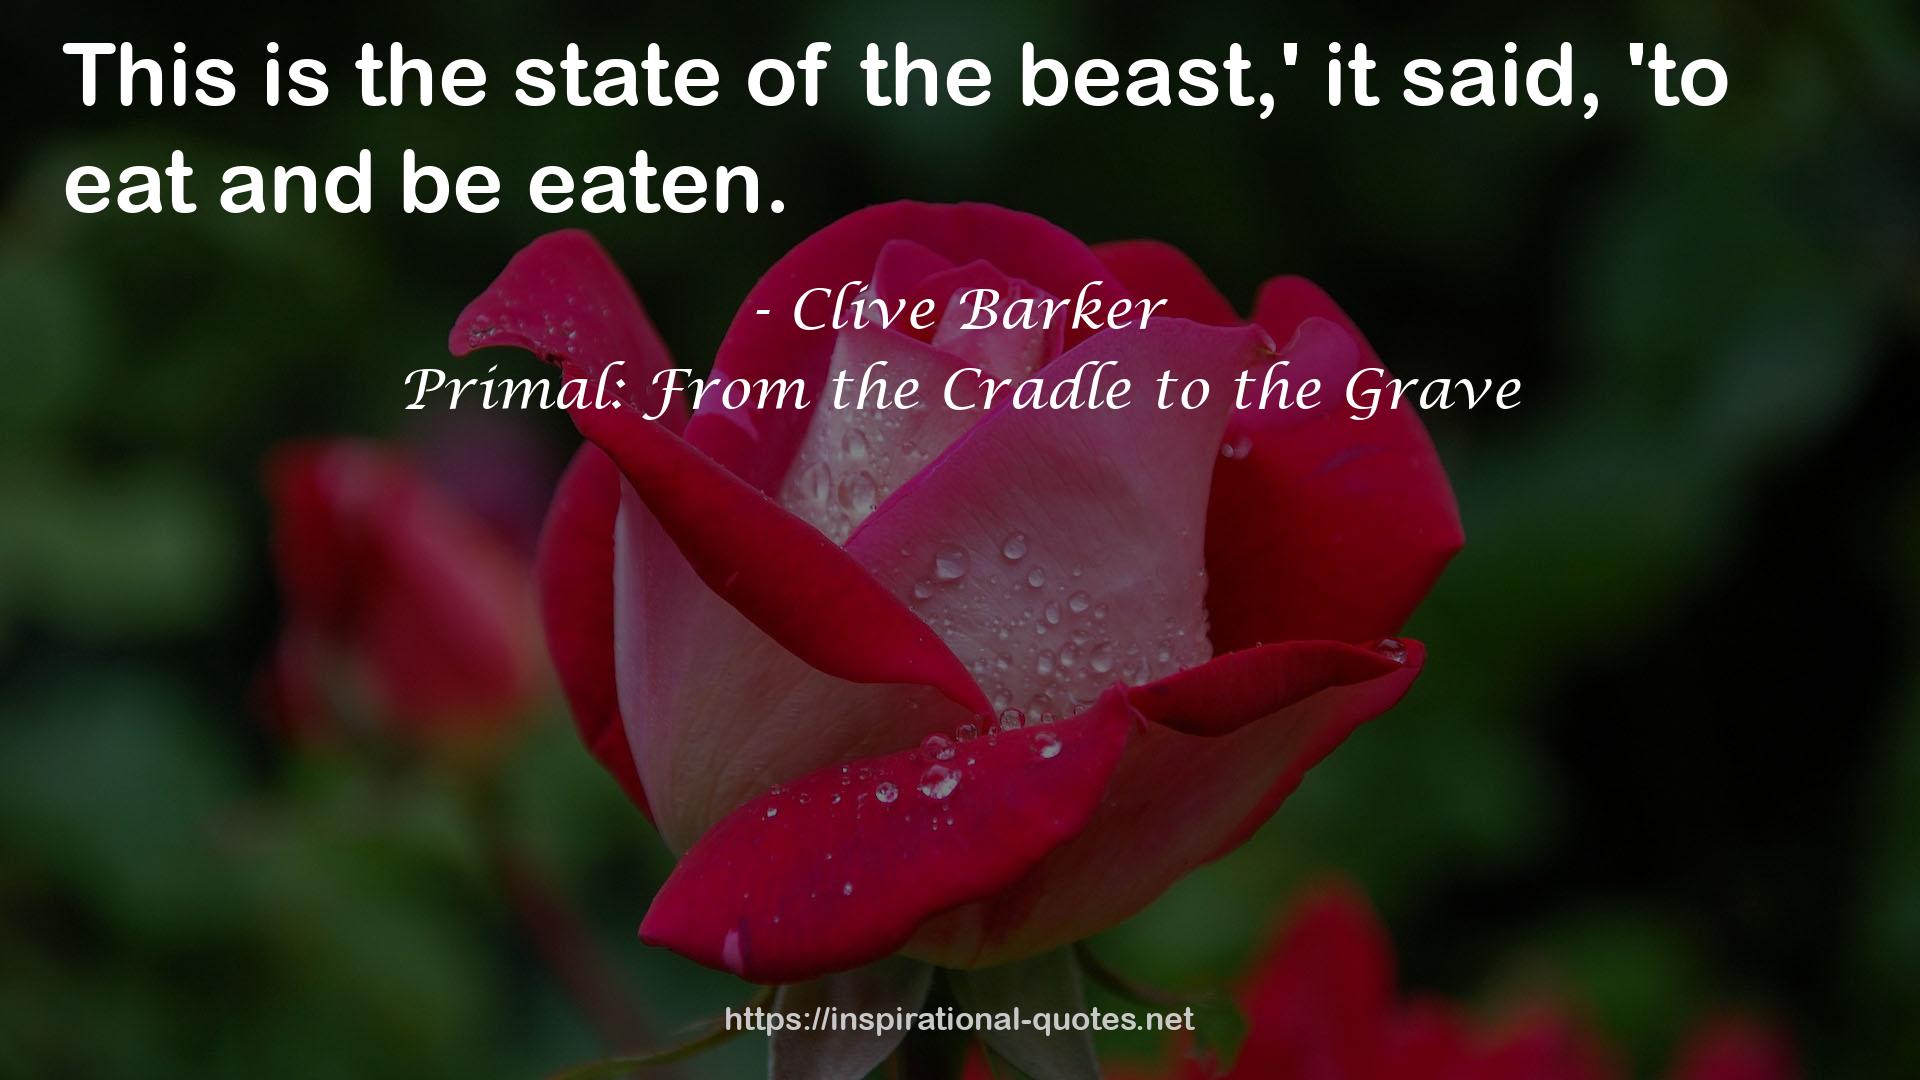 Primal: From the Cradle to the Grave QUOTES